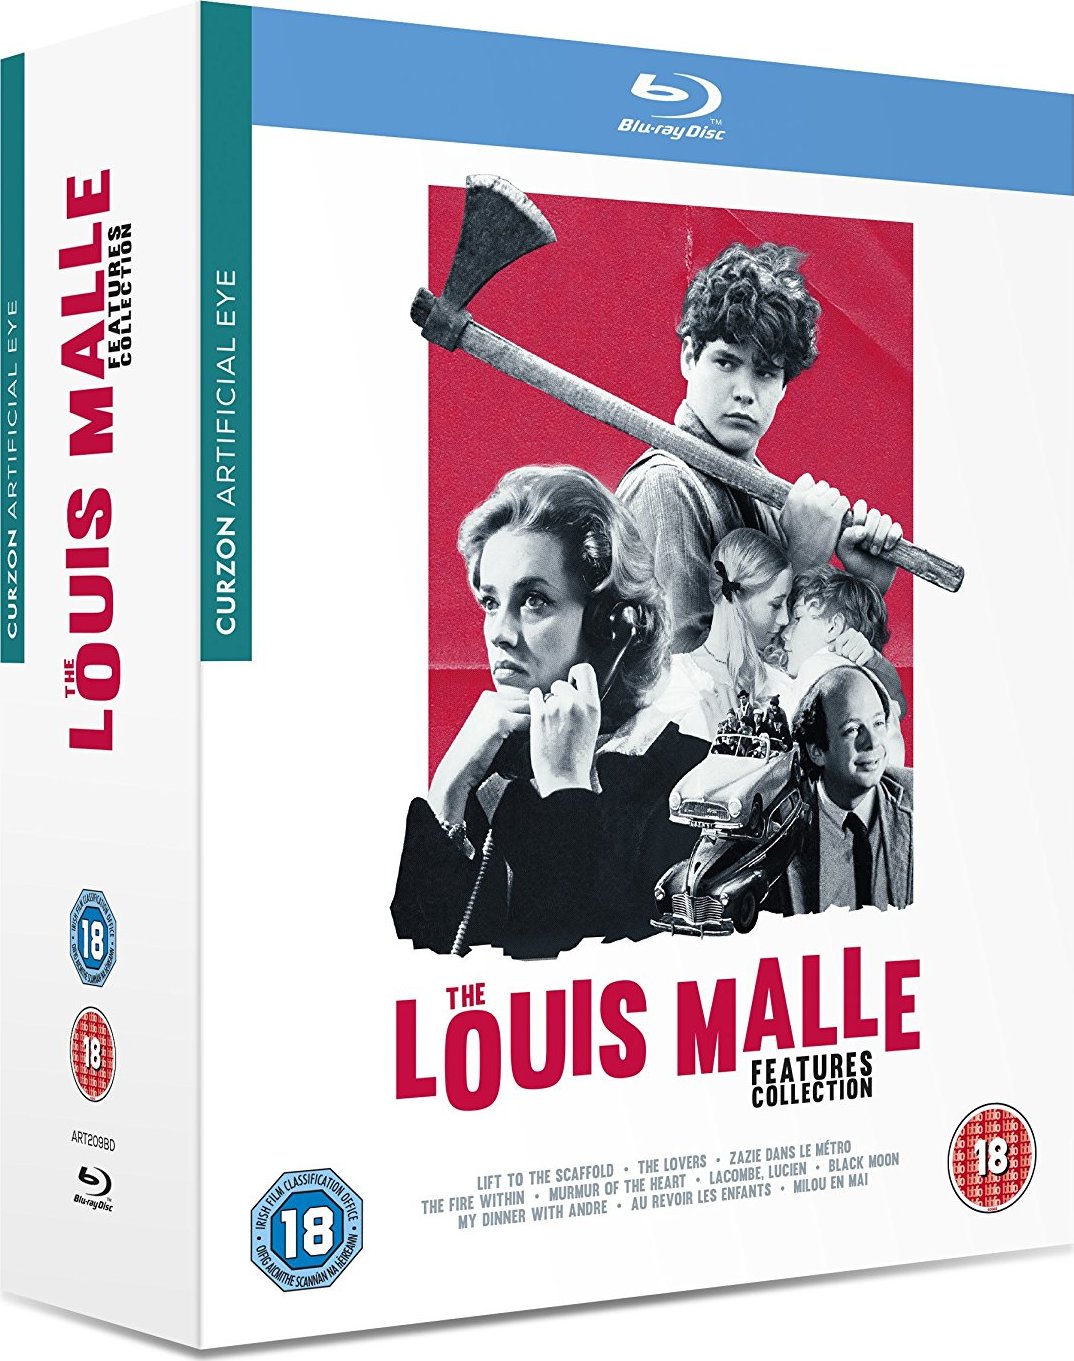 MY DINNER WITH ANDRE (Blu-ray, Criterion Collection) Louis Malle